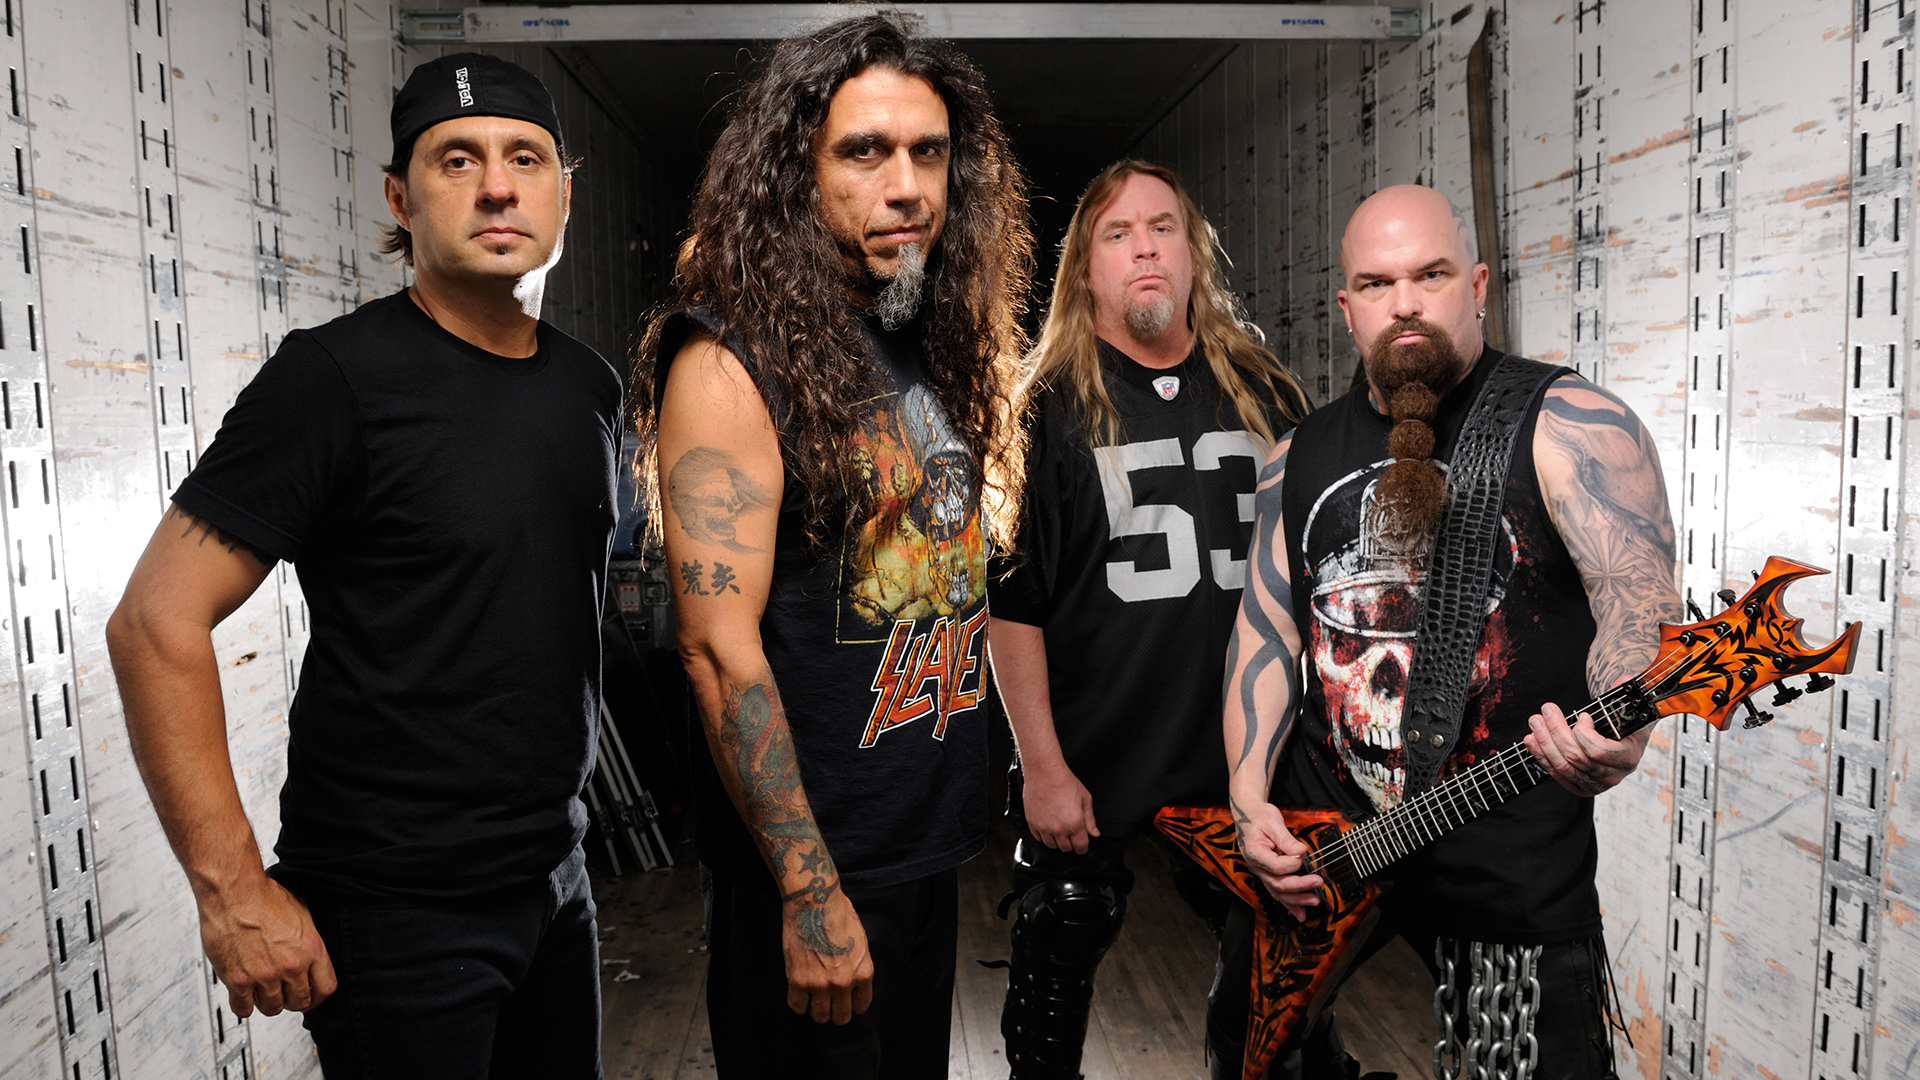 Speed Metal/Heavy Metal Band Slayer in 2012